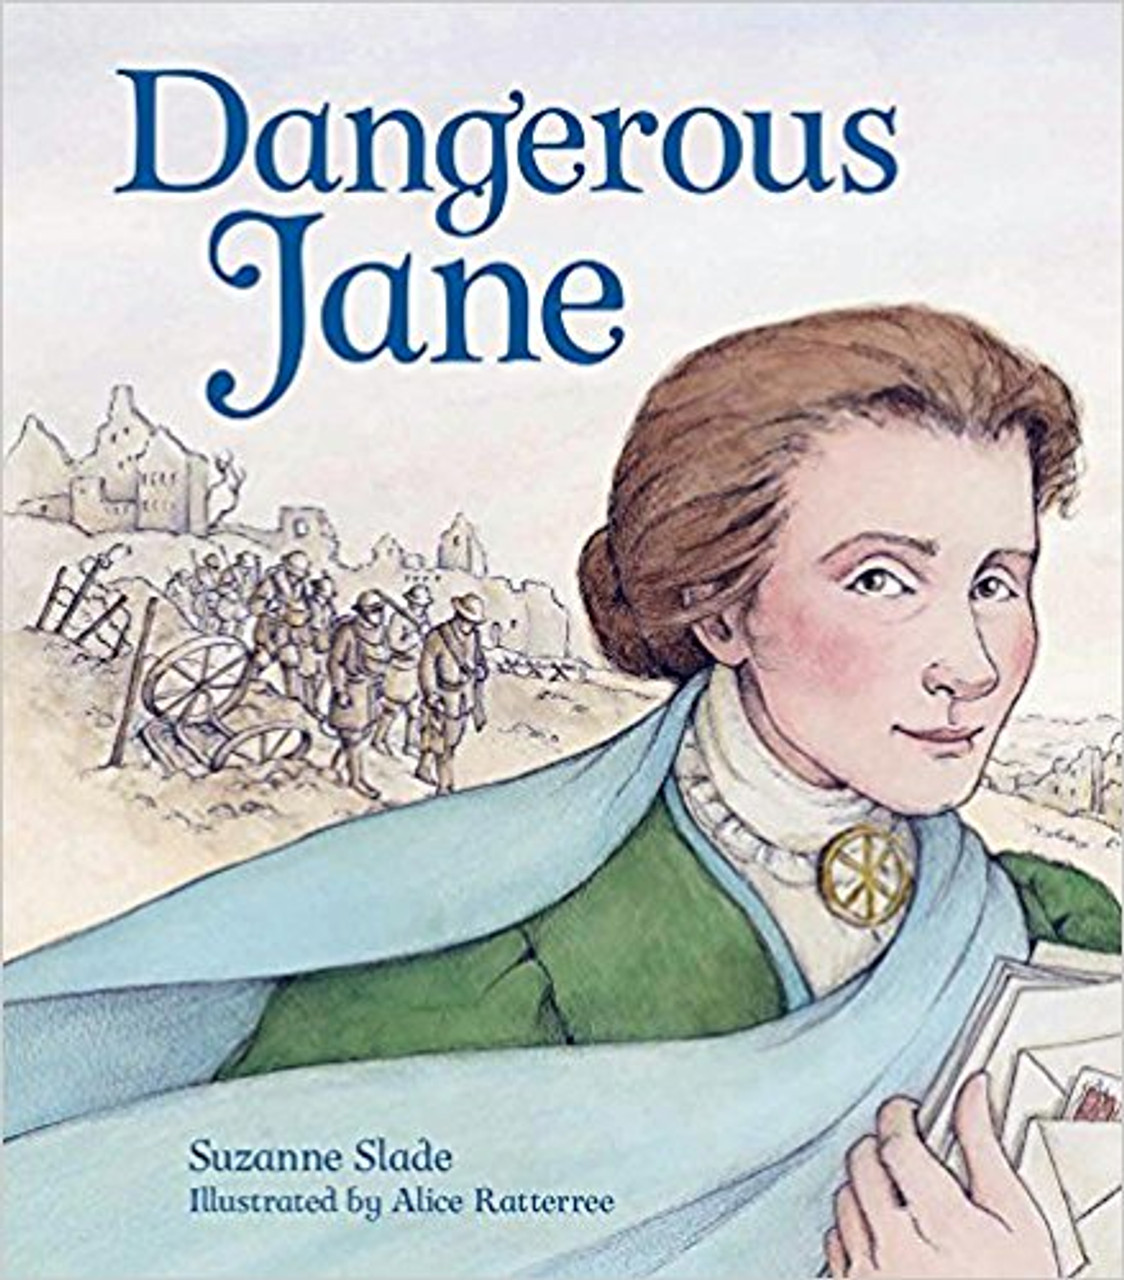 Janes heart ached for the world, but what could she do to stop a war? This energetic and inspiring picture book biography of activist Jane Addams focuses on the peace work that won her the Nobel Peace Prize. From the time she was a child, Janes heart ached for others. At first the focus of her efforts was on poverty, and lead to the creation of Hull House, the settlement house she built in Chicago. For twenty-five years, shed helped people from different countries live in peace at Hull House. But when war broke out, Jane decided to take on the world and become a dangerous woman for the sake of peace. Suzanne Slades powerful text written in free verse illuminates the life of this inspiring figure while Alice Ratterrees stunning illustrations bring Jane Addams and her world to life.